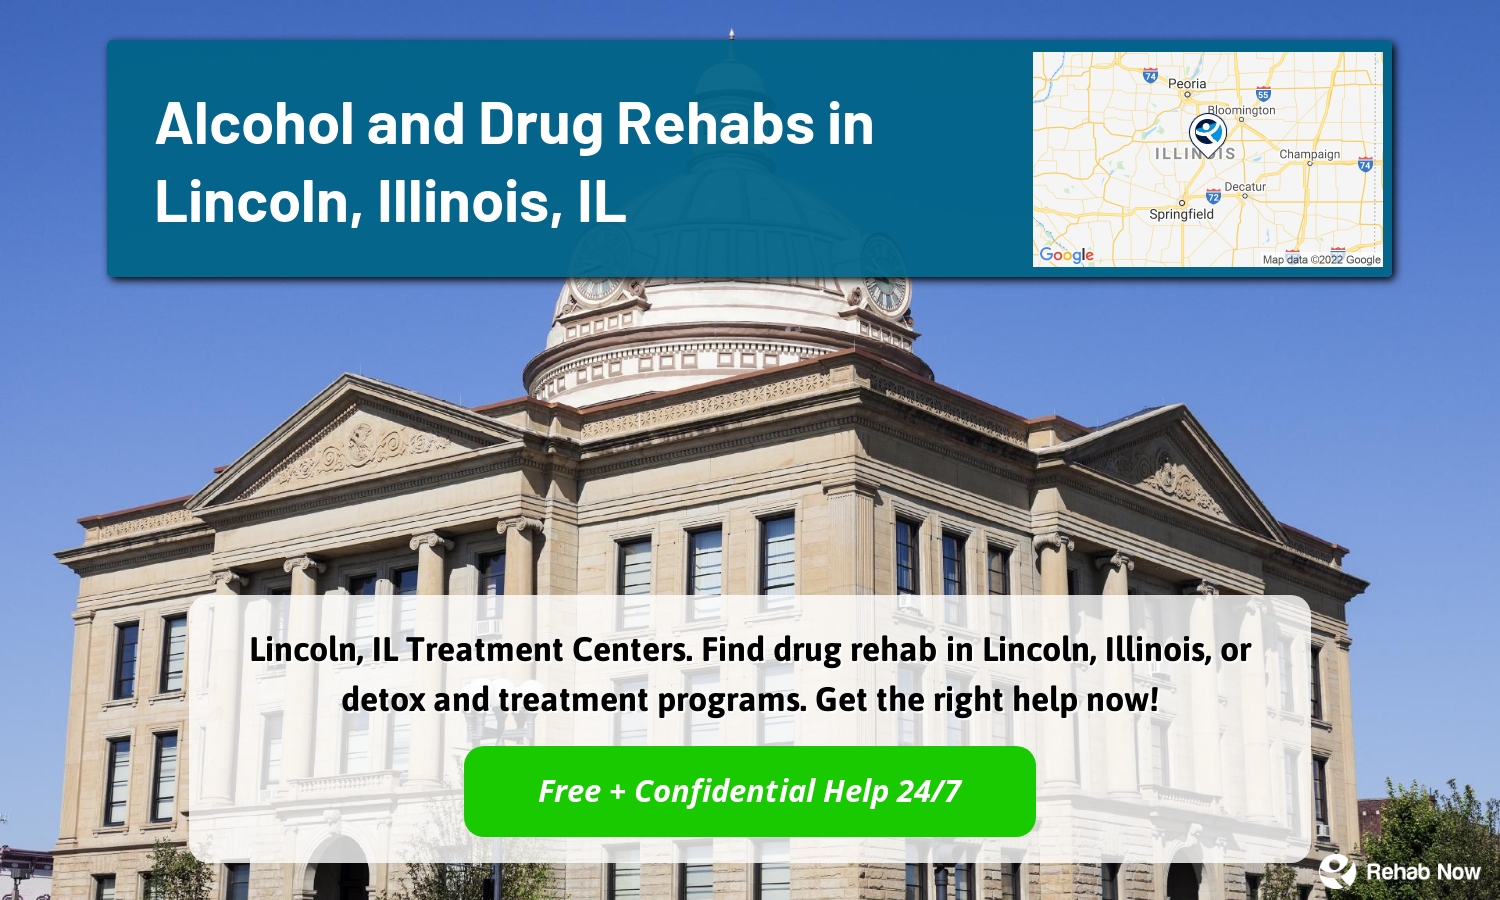 Lincoln, IL Treatment Centers. Find drug rehab in Lincoln, Illinois, or detox and treatment programs. Get the right help now!